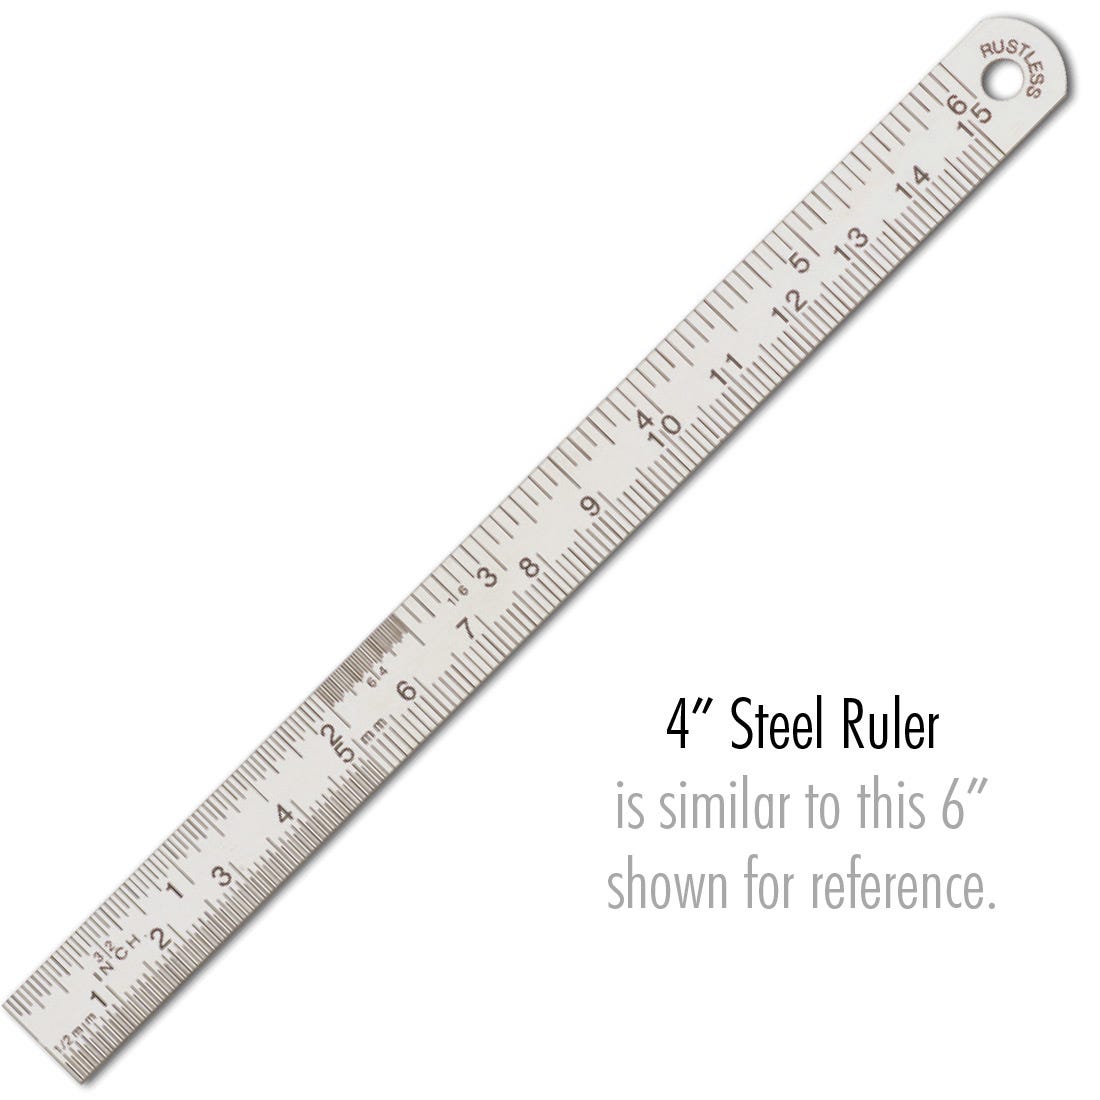 ACE Stainless Steel Ruler - Inches and Millimeter Markings, 1/2" x 4"